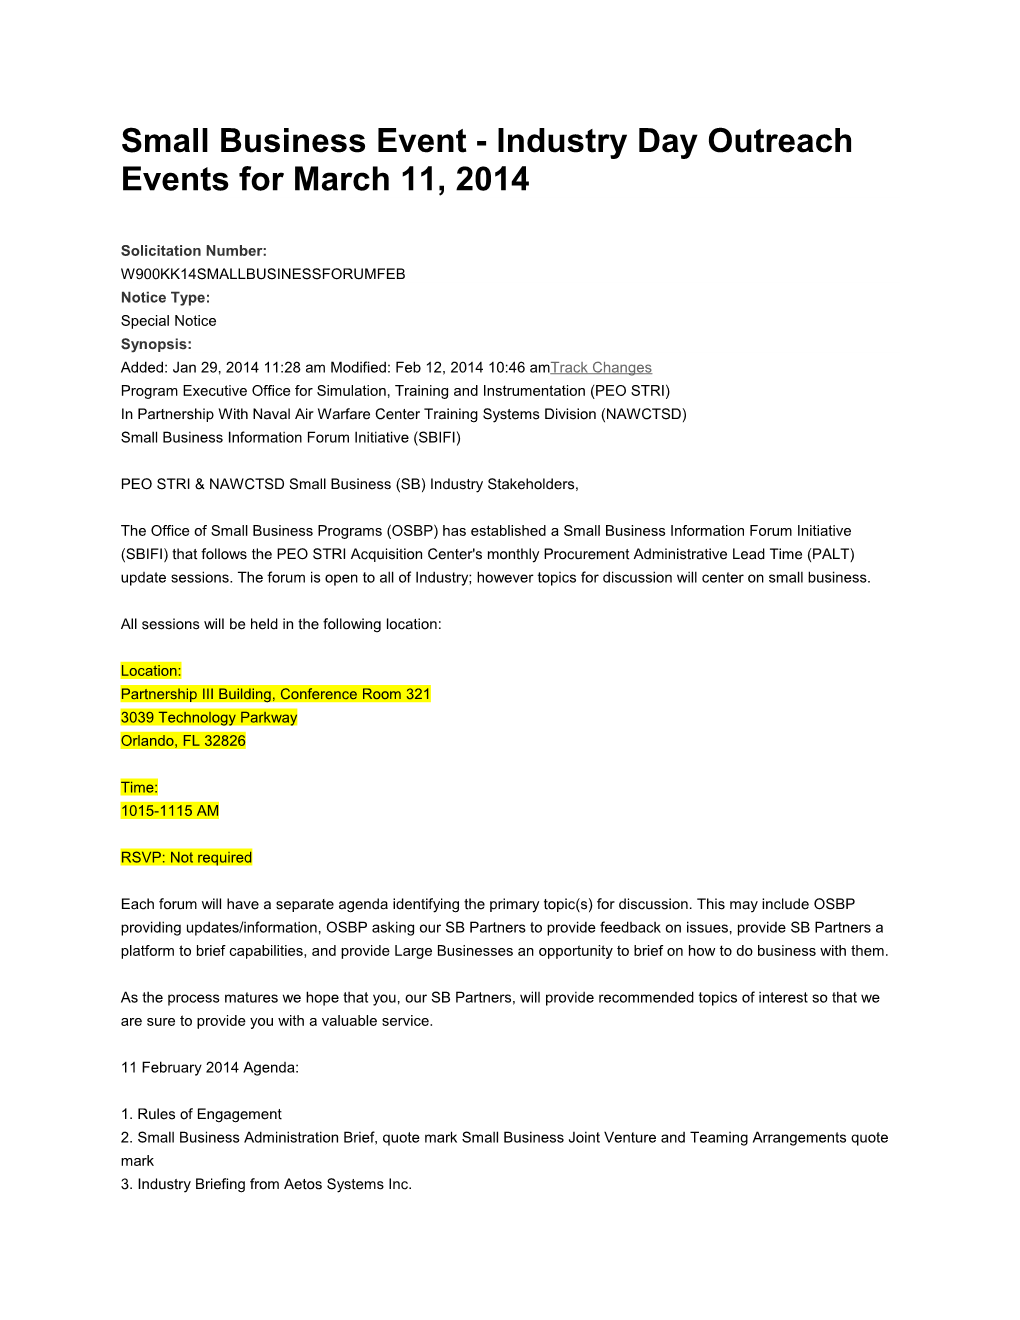 Small Business Event - Industry Day Outreach Events for March 11, 2014